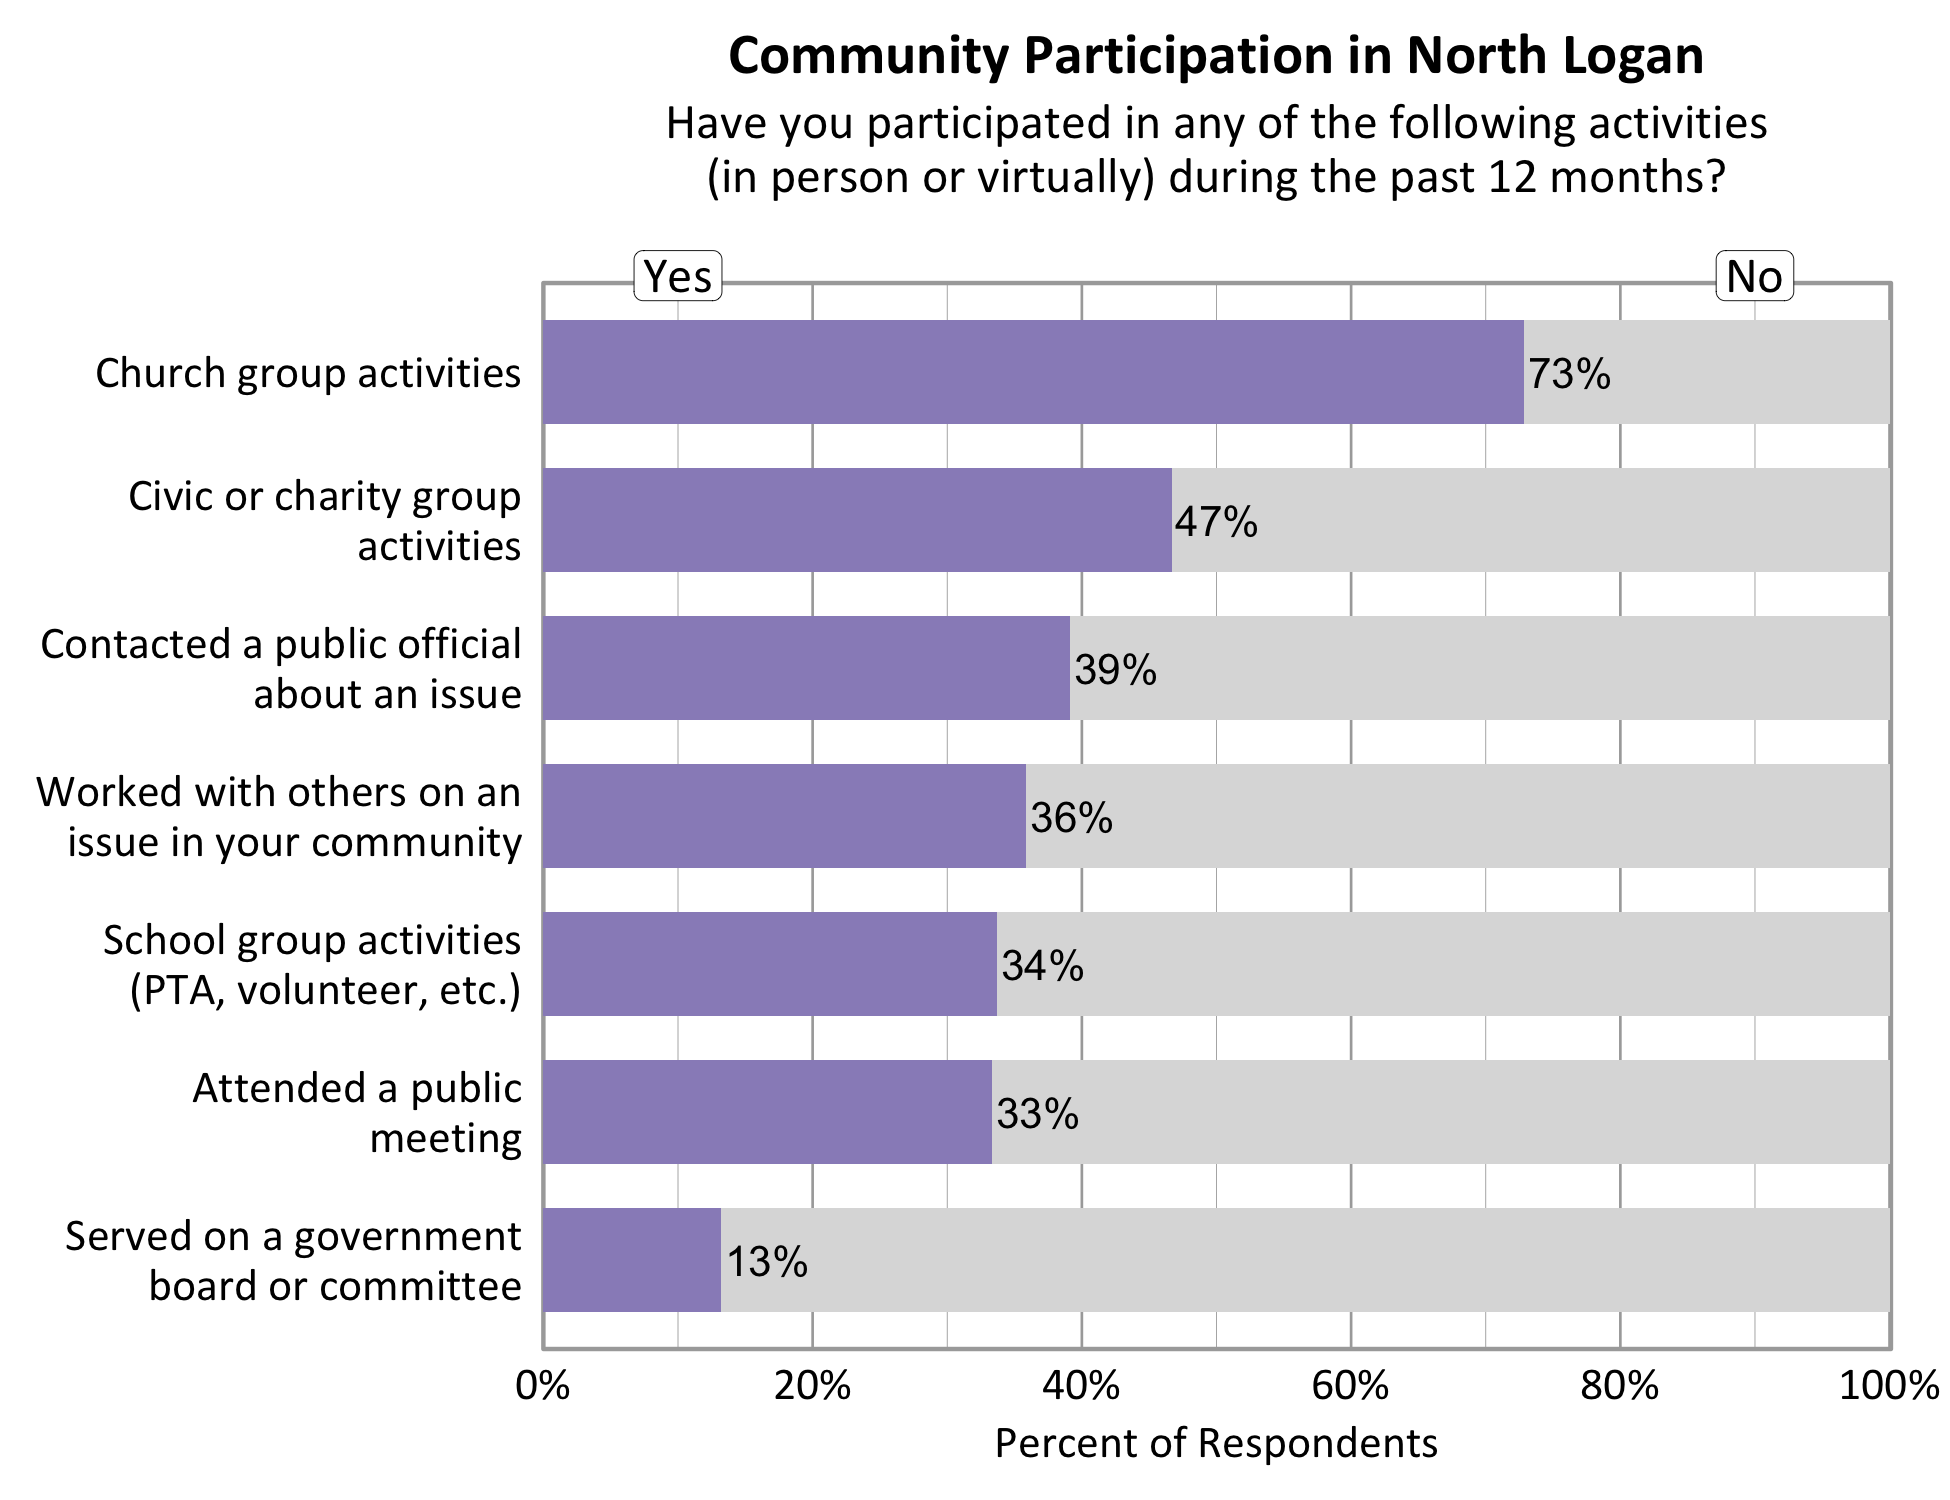 Type: Bar Graph Title: Community Participation in North Logan. Subtitle: Have you participated in any of the following activities (in person or virtually) during the past 12 months? Data - 73% of respondents indicated yes to church group activities. 36% of respondents indicated yes to working with others on an issue in your community. 39% of respondents indicated yes to contacting a public official about an issue. 47% of respondents indicated yes to a civic or charity group activity. 34% of respondents indicated yes to participating in School group activities. 33% of respondents indicated yes to attending a public meeting. 13% of respondents indicated yes to serving on a government board or committee. 